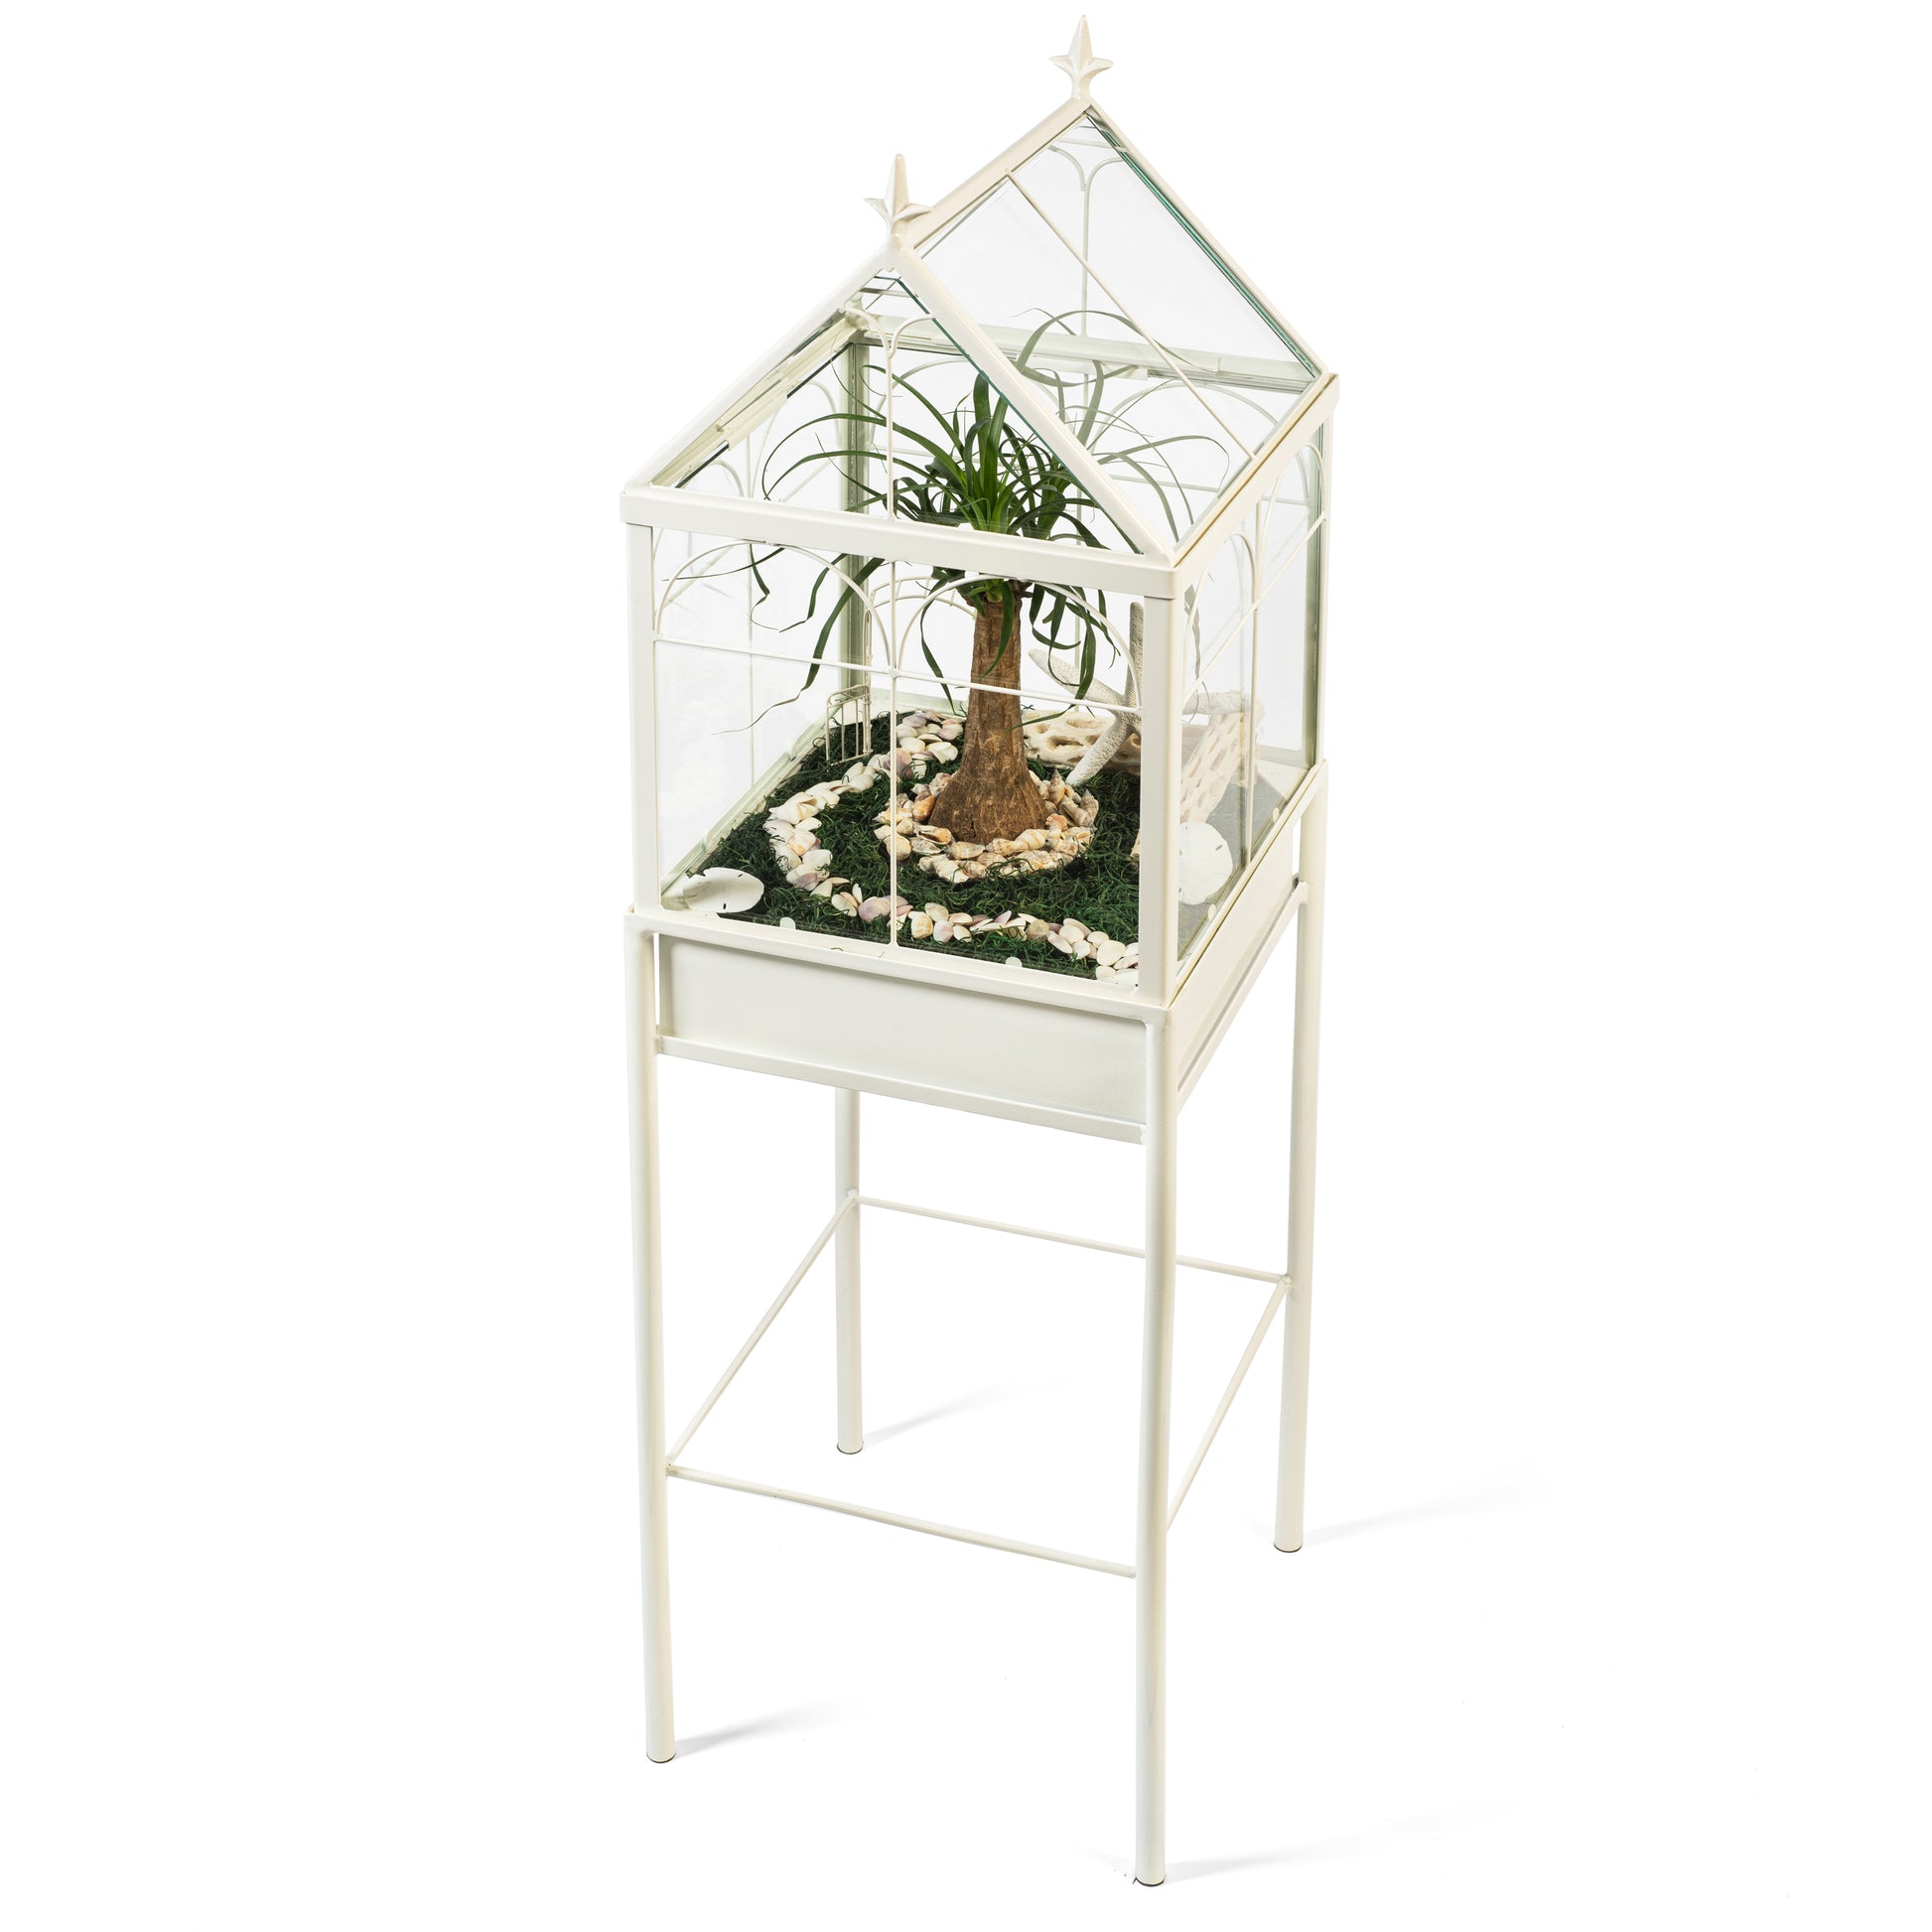 H Potter Square Freestanding Wardian Case Terrarium - Glass Plant Container - Tall Orchids Christmas Valentine Mothers Day